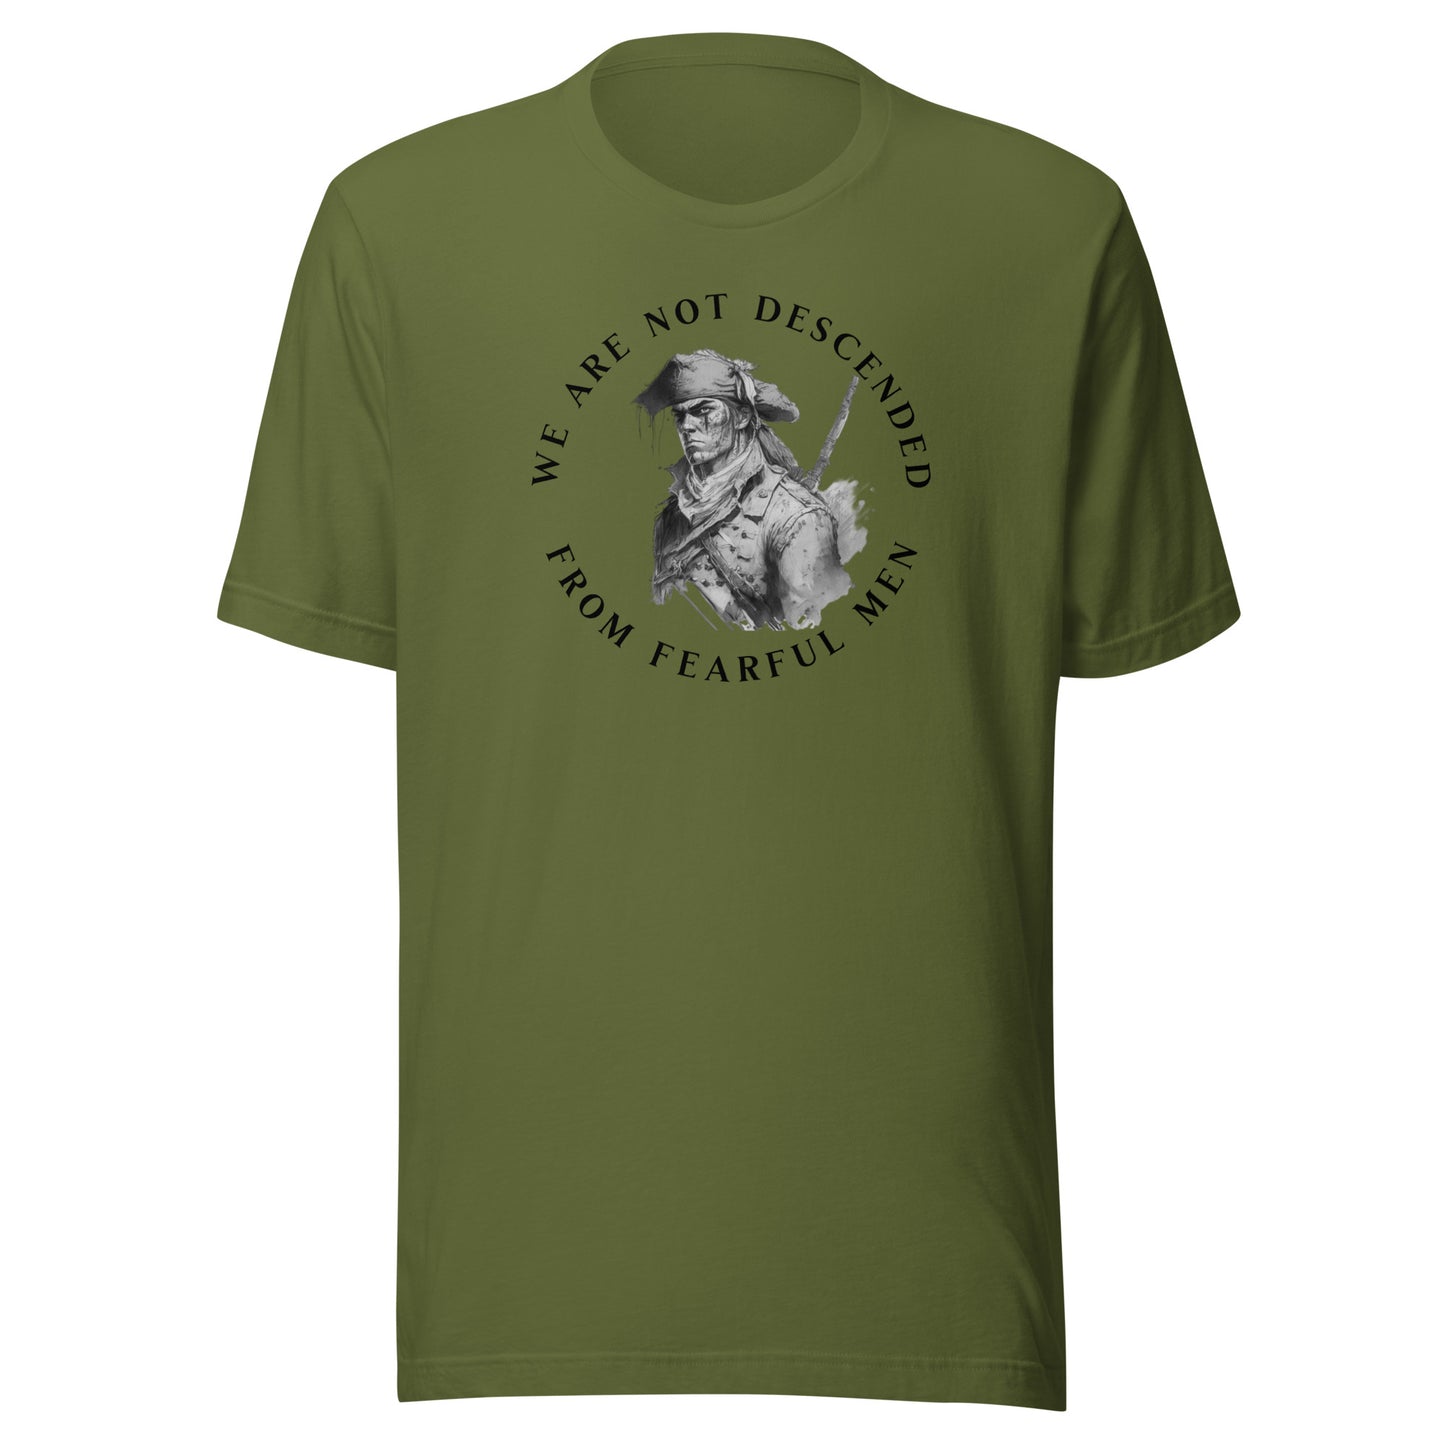 Fearless Patriot Men's T-Shirt Olive